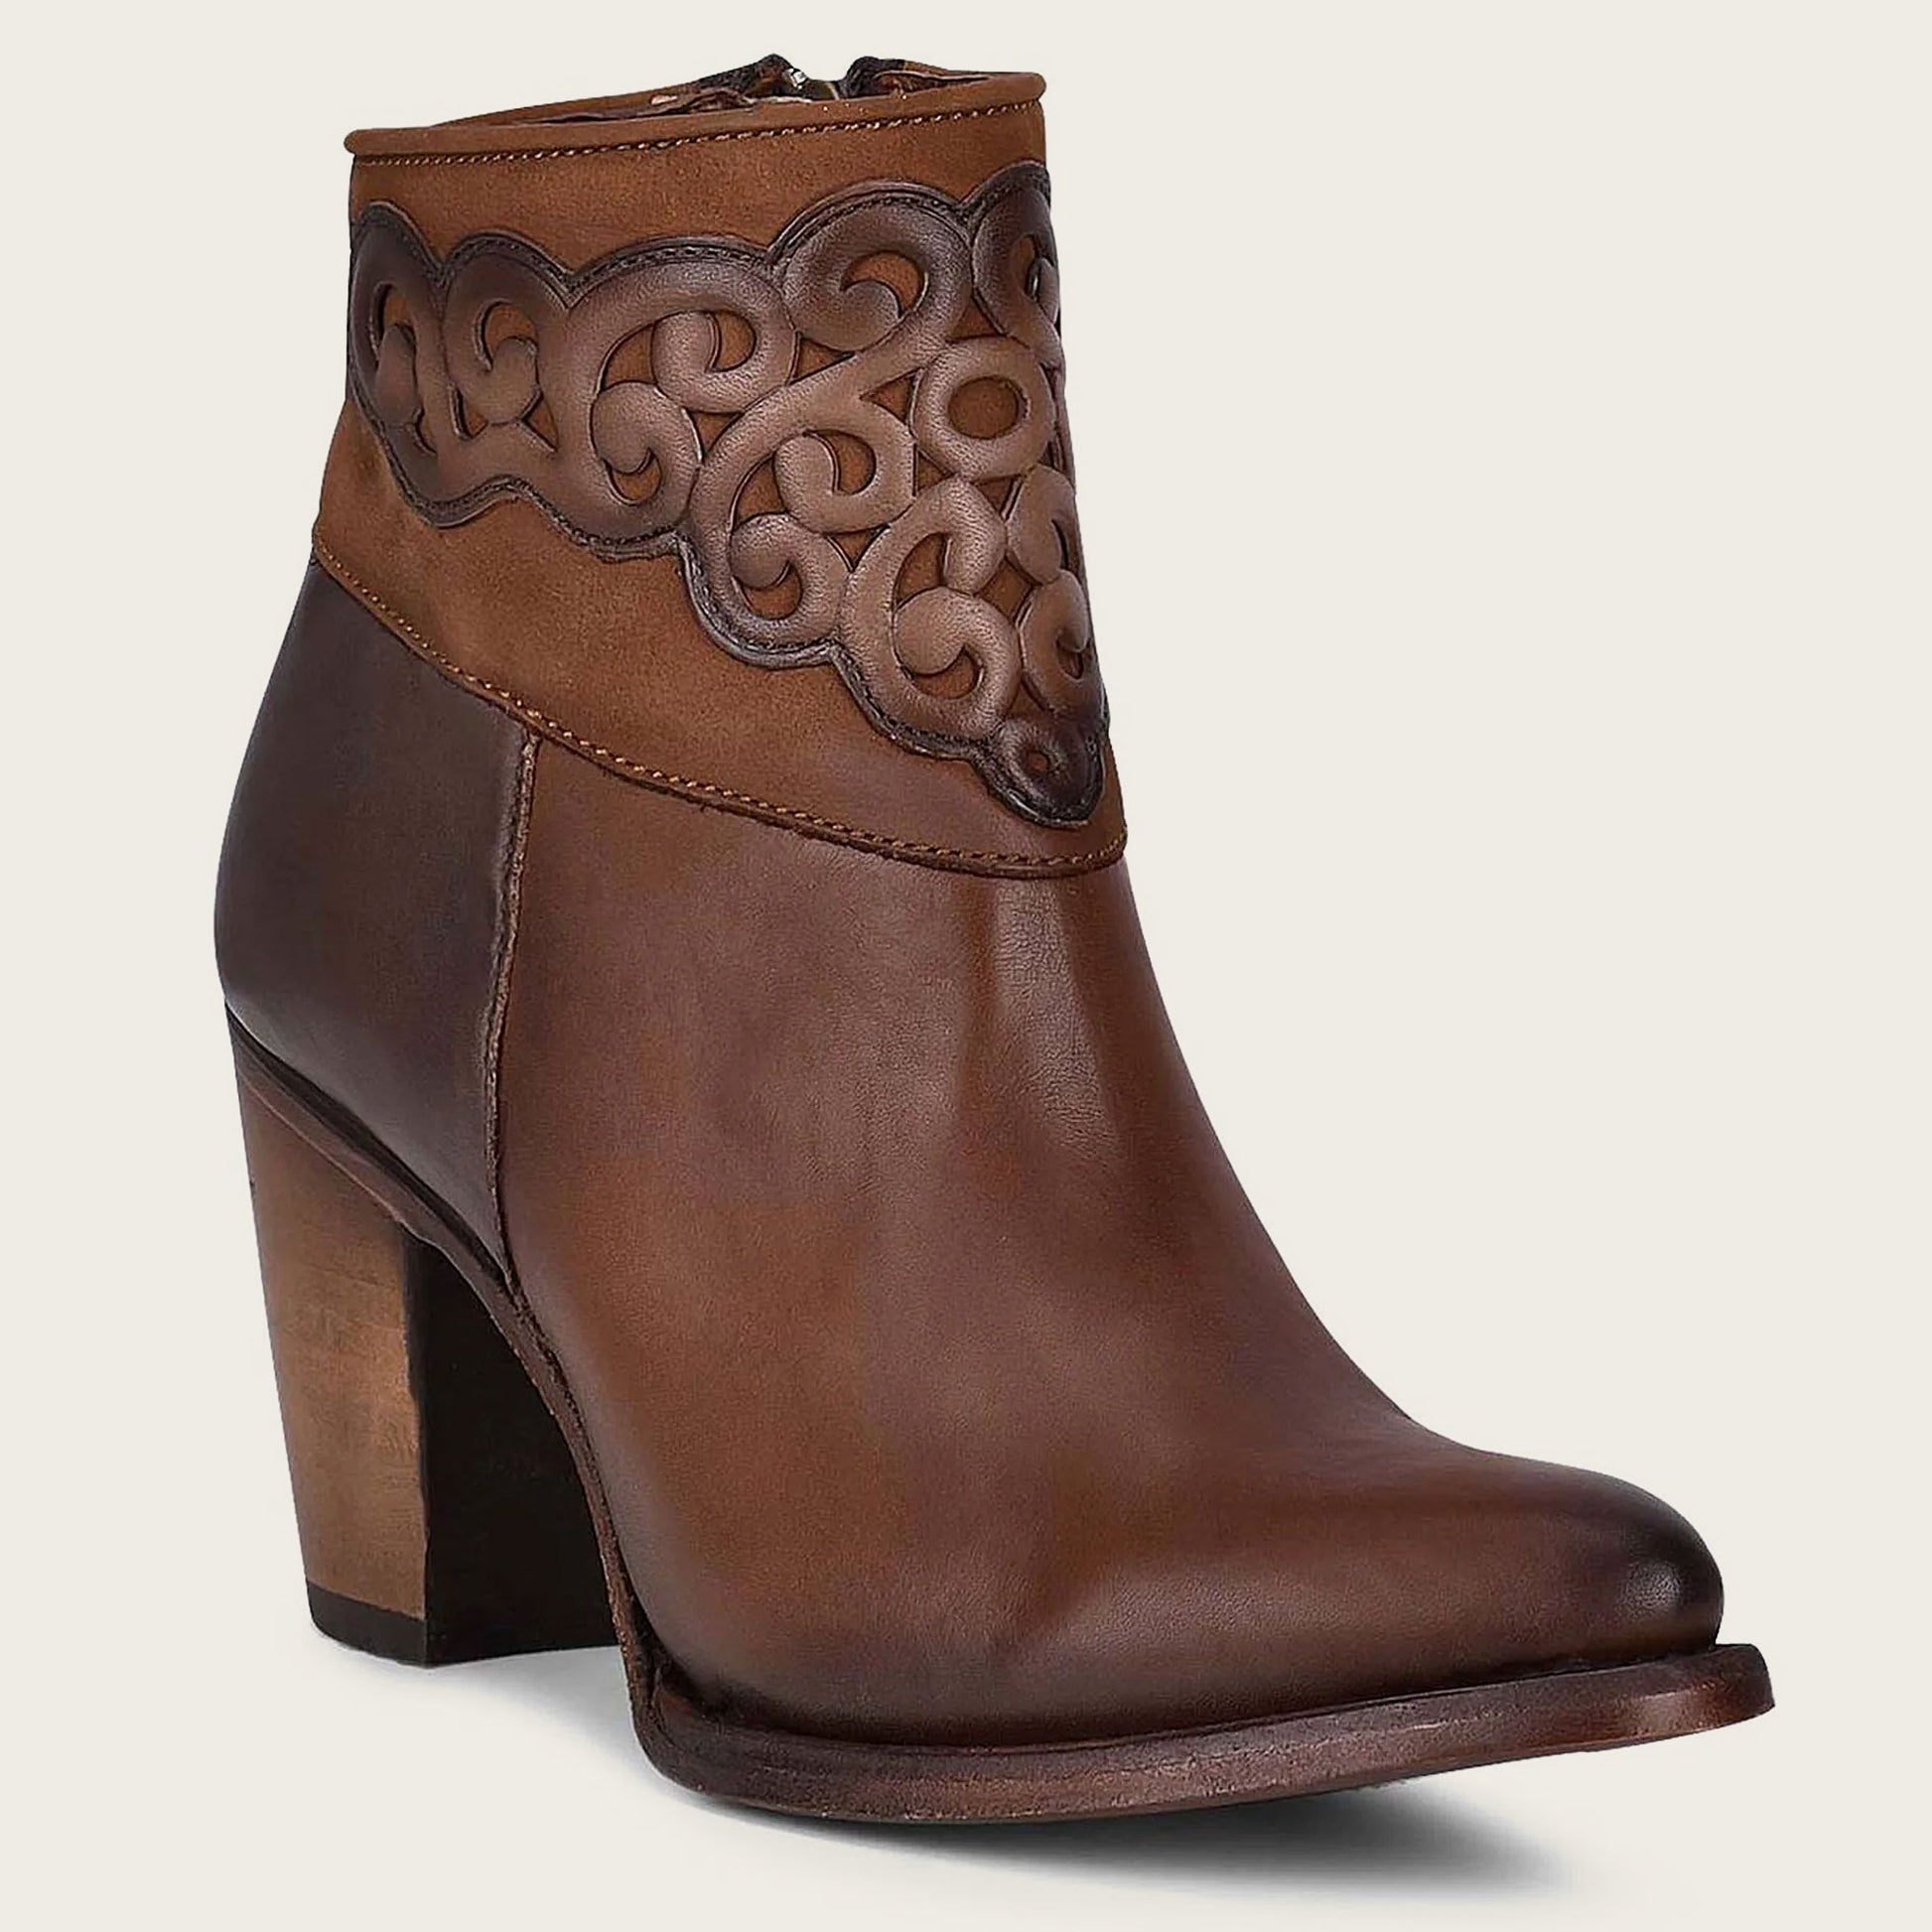 From casual everyday ankle boots to versatile block-heel booties